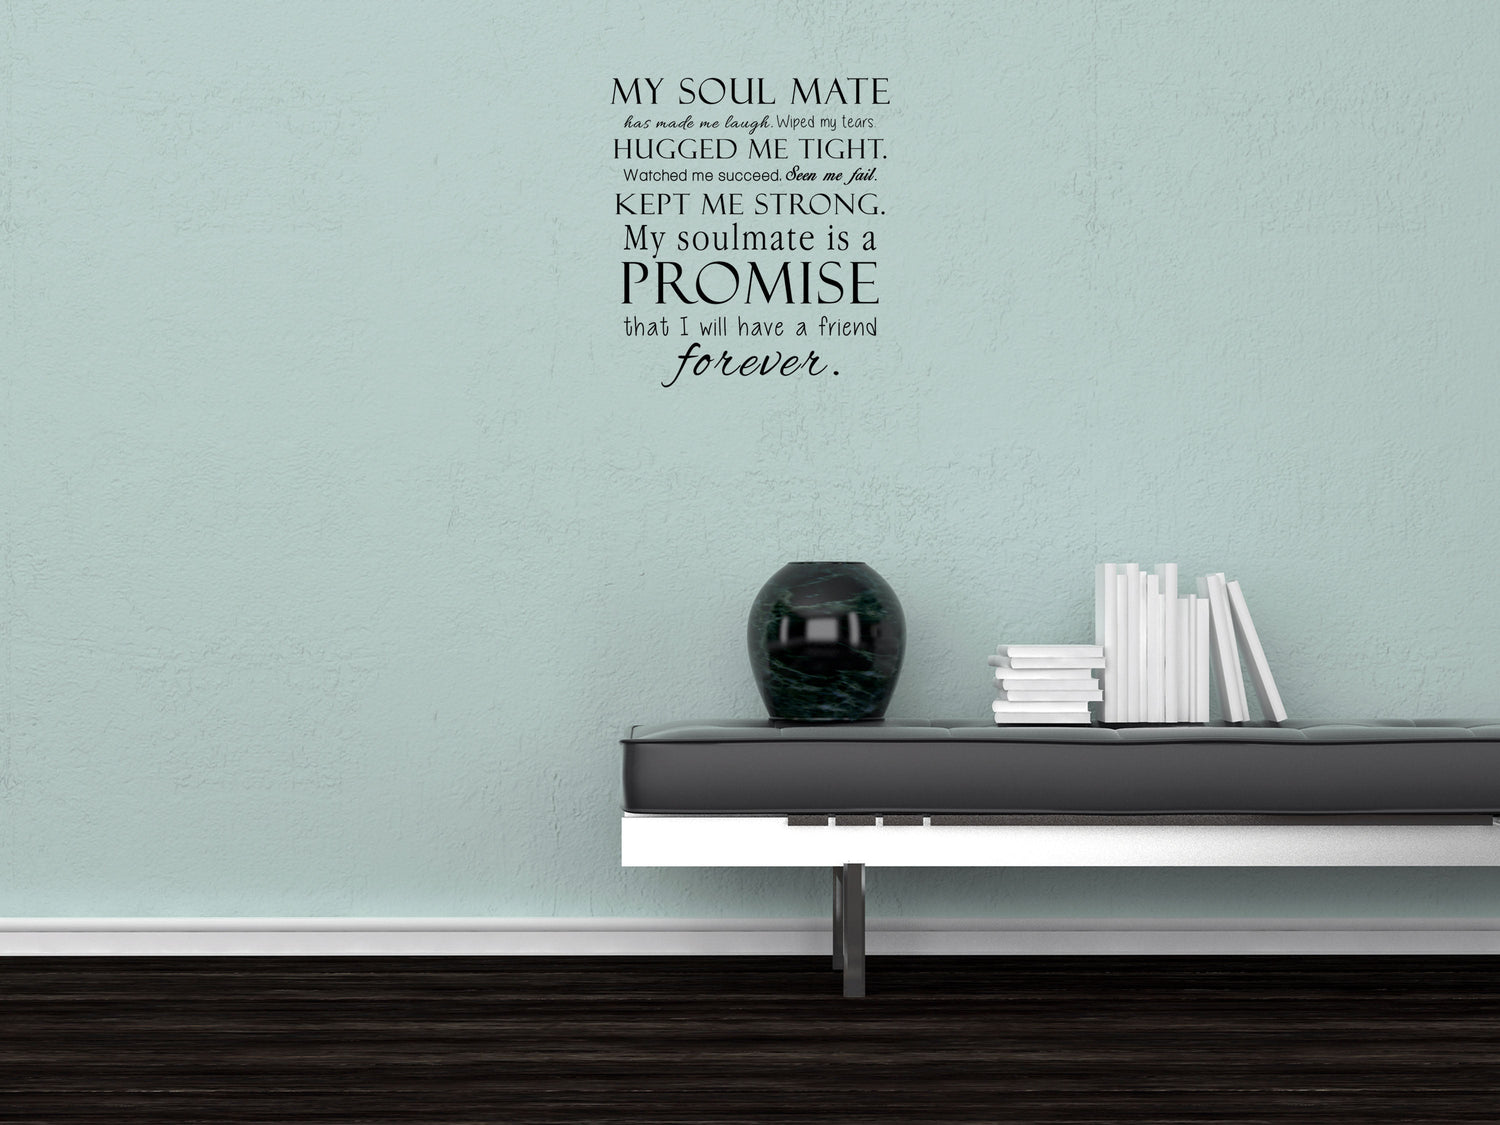 My Soulmate Romantic - Inspirational Wall Decals Vinyl Wall Decal Inspirational Wall Signs 